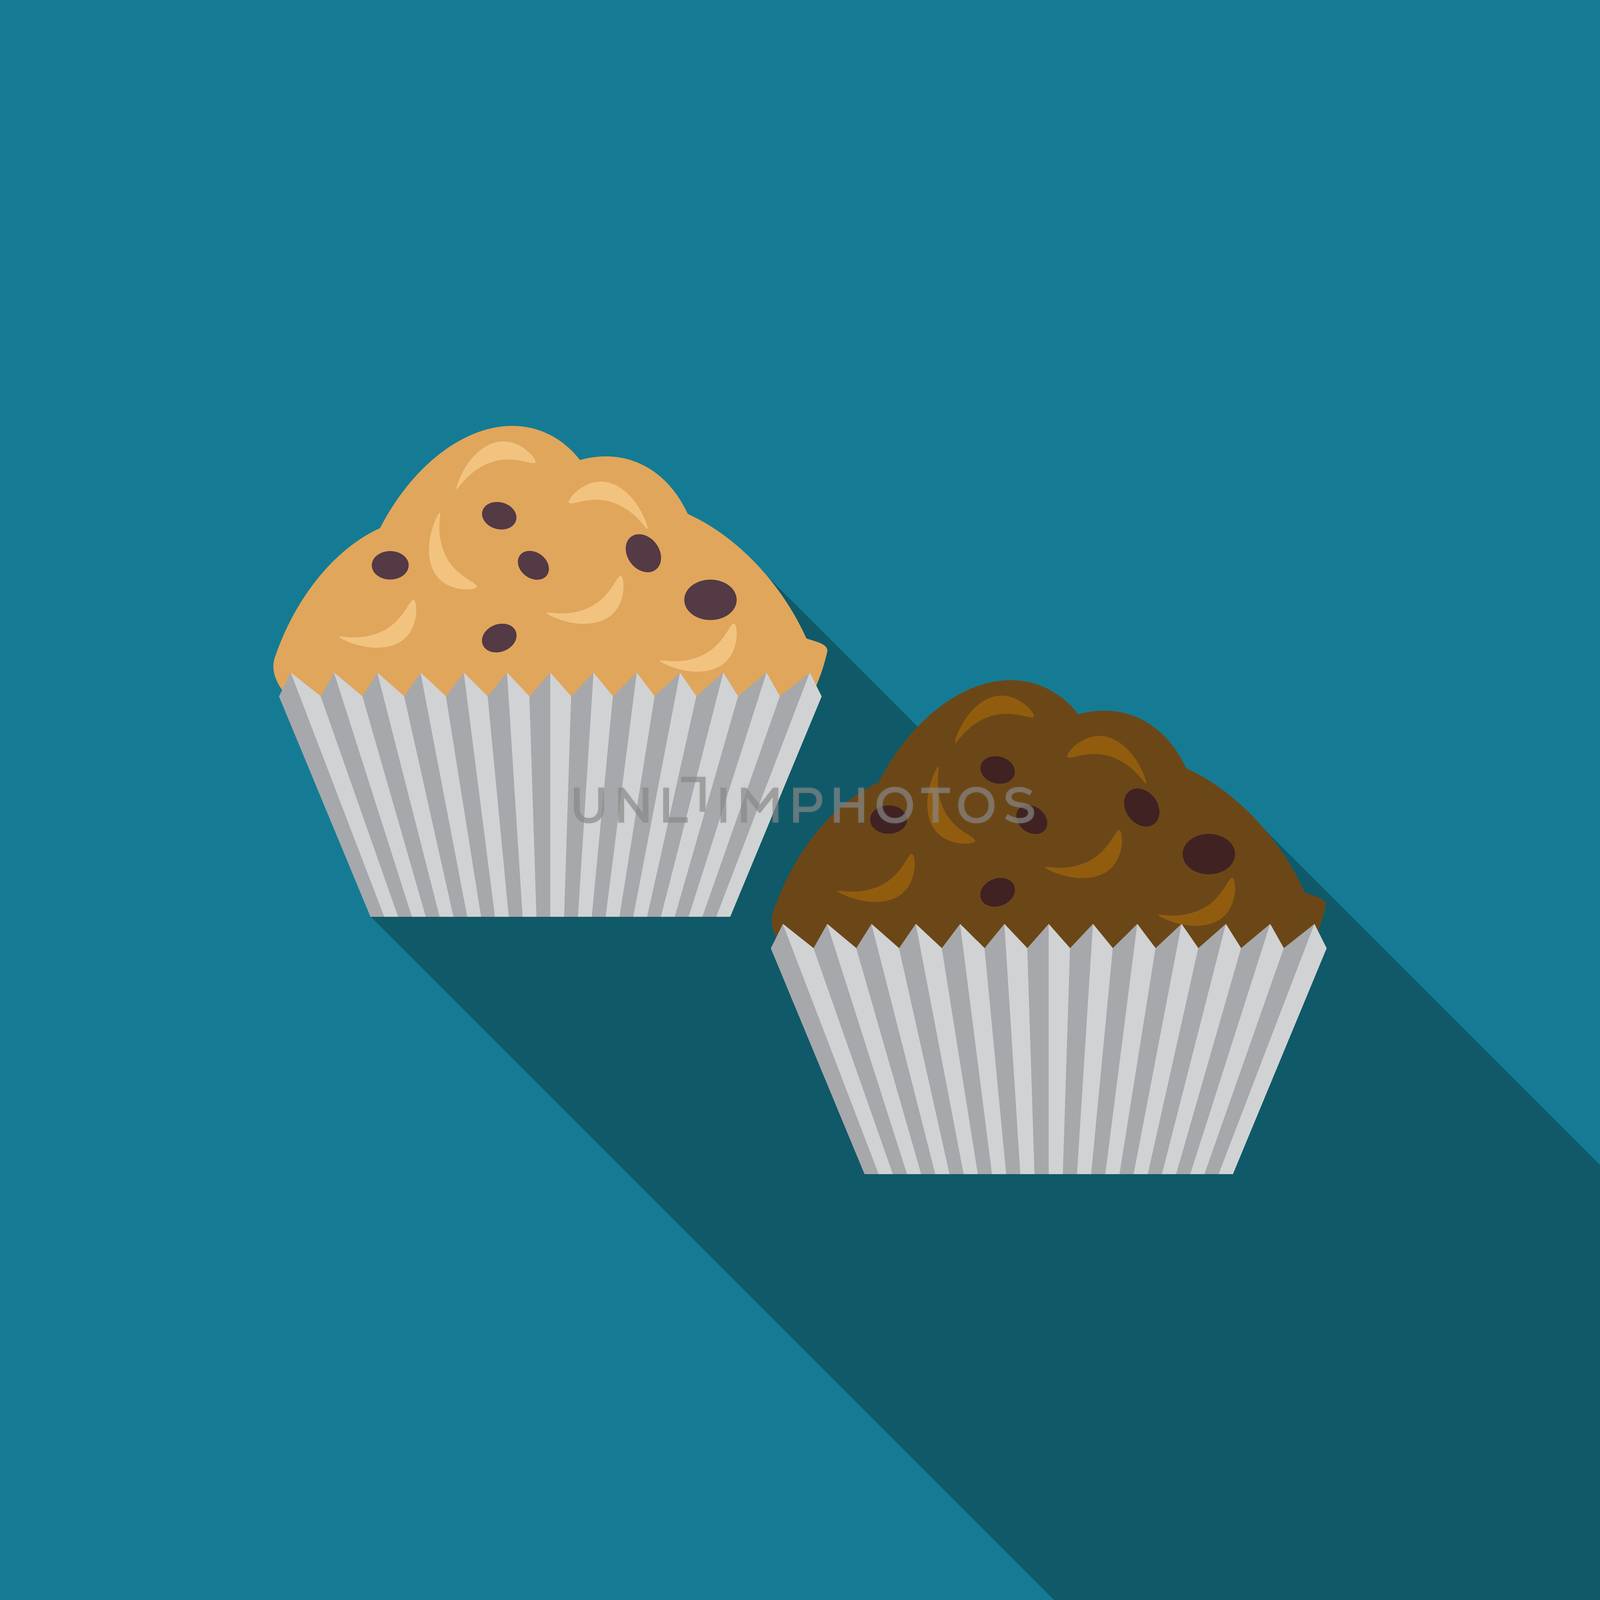 Flat design vector muffins icon with long shadowFlat design vector vinyl record icon with long shadow by Lemon_workshop